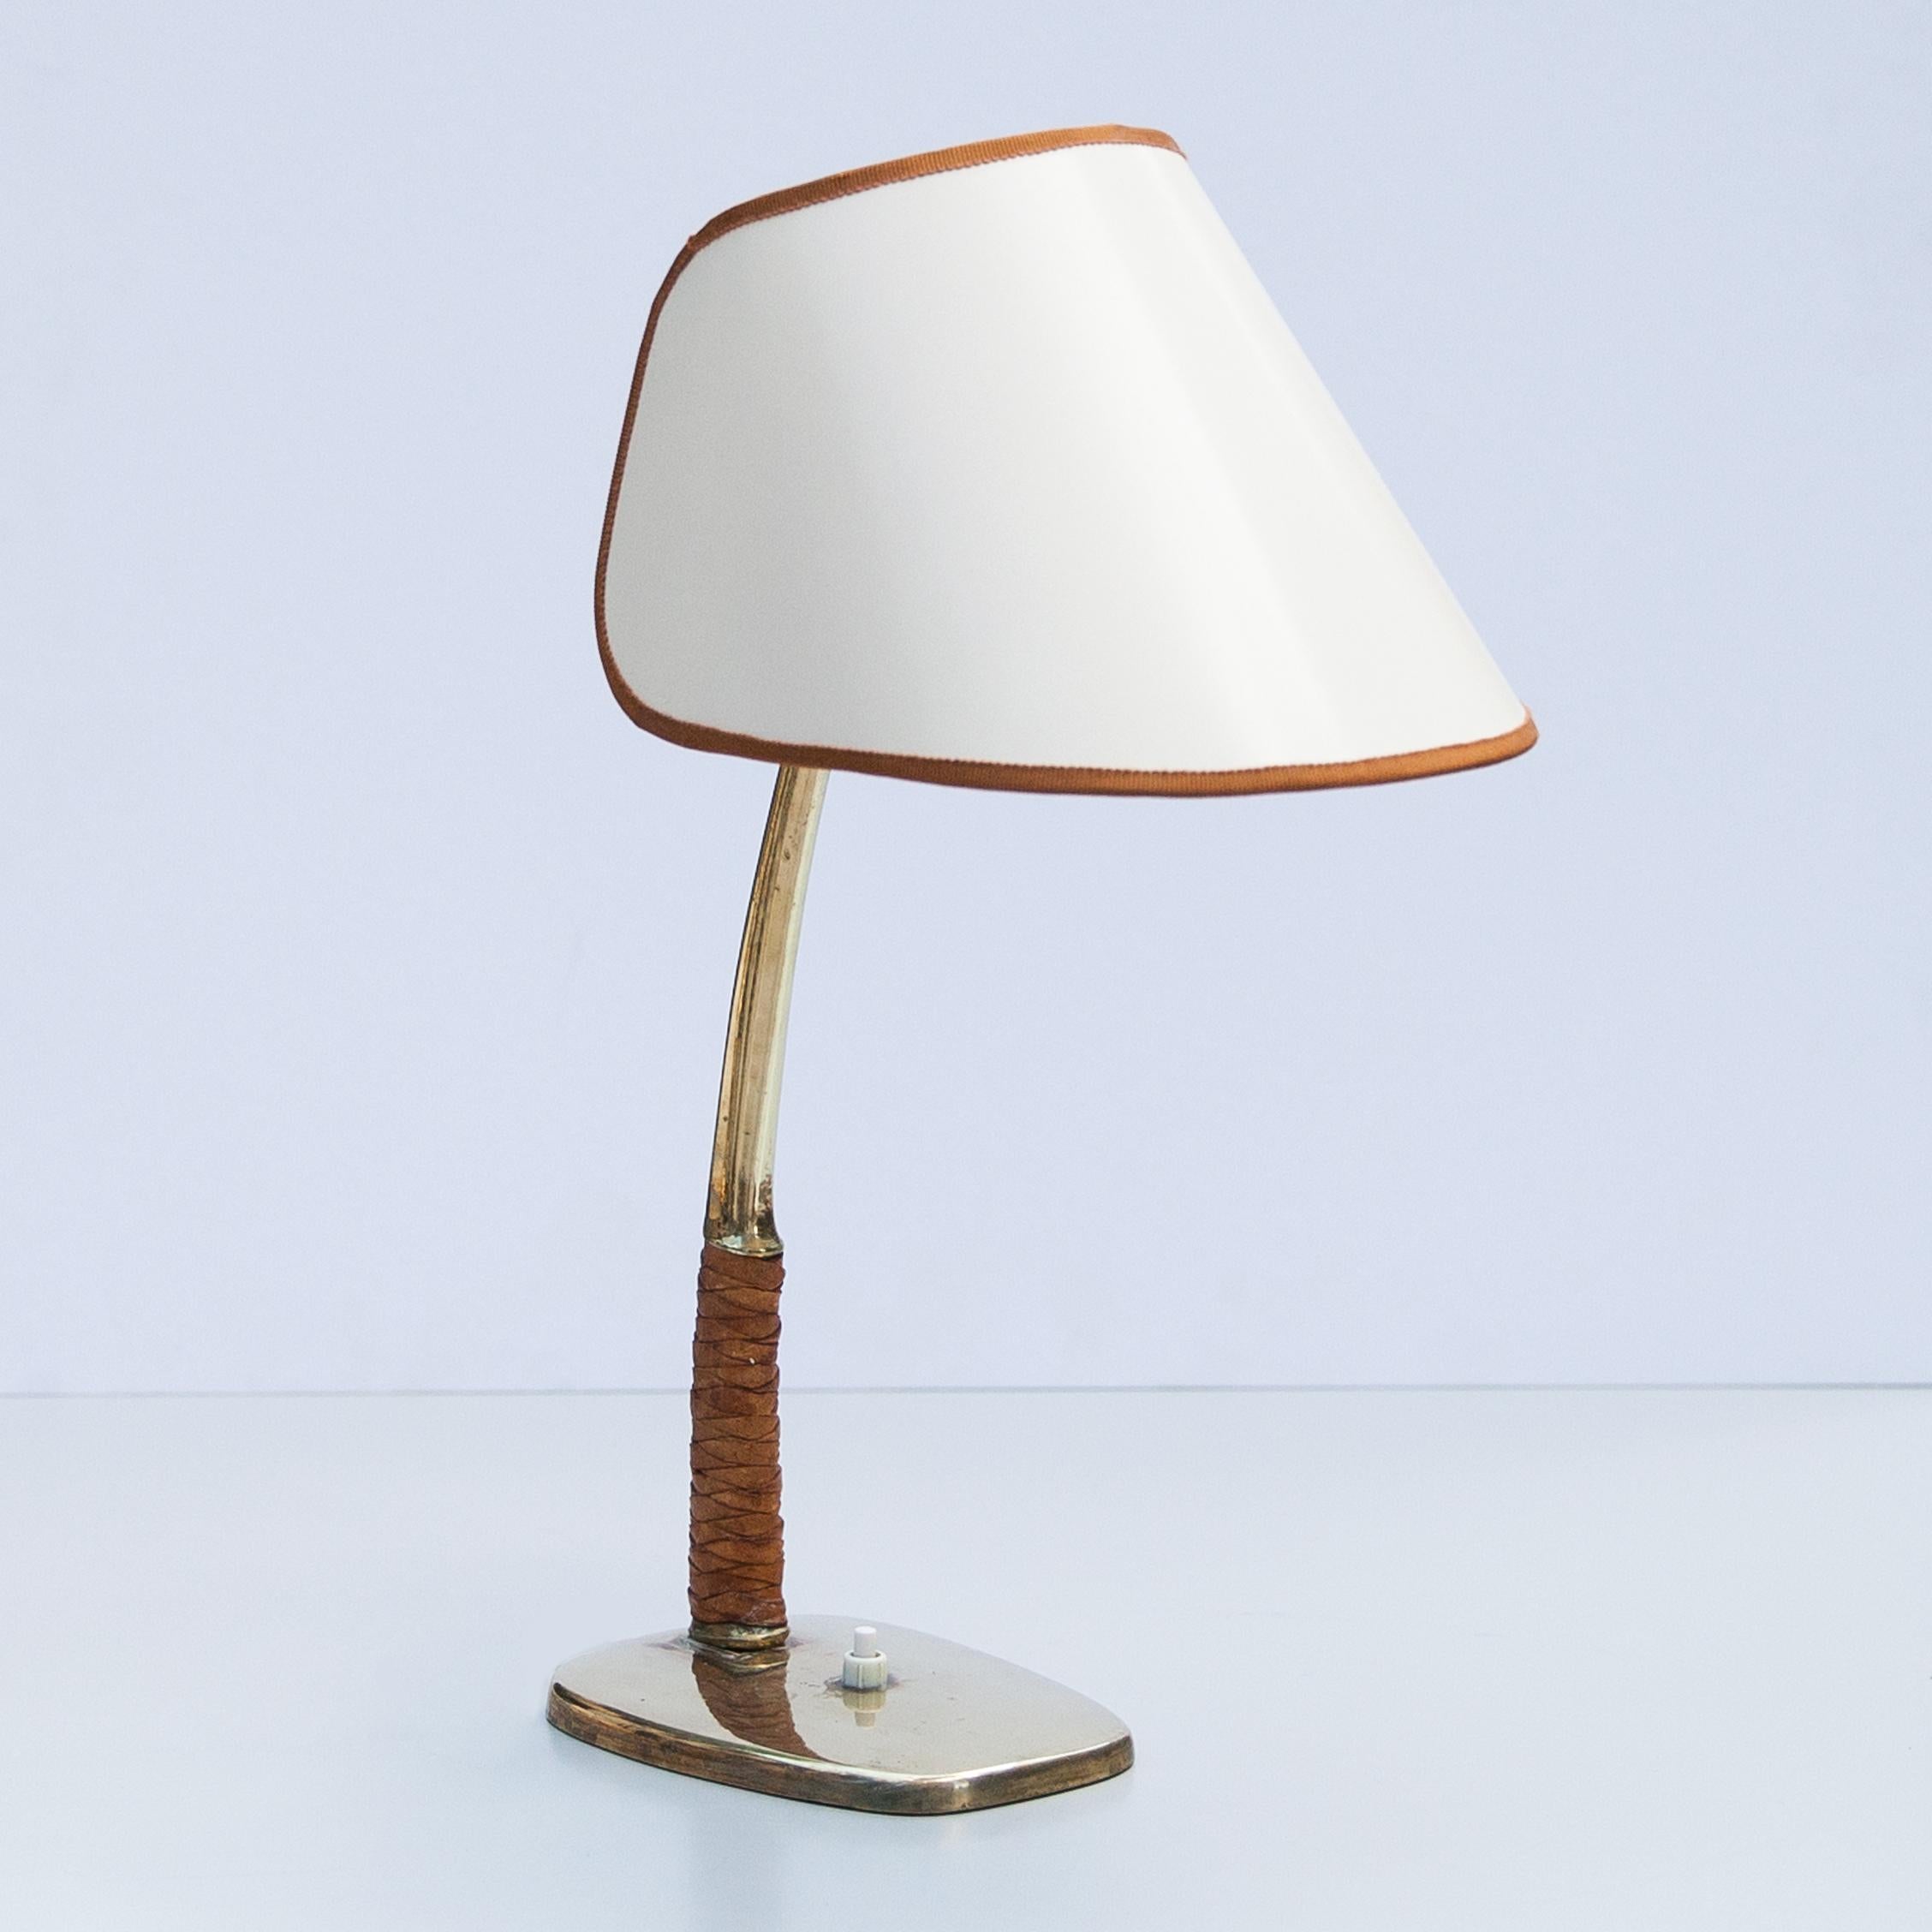 Austrian mid century brass desk / table lamp lamp. 
Designed and manufactured by J. T. Kalmar Vienna in the 1950s as model no. 1191, name is Arnold.

It features a brass base and stem with leather grip and a original crème white shade in